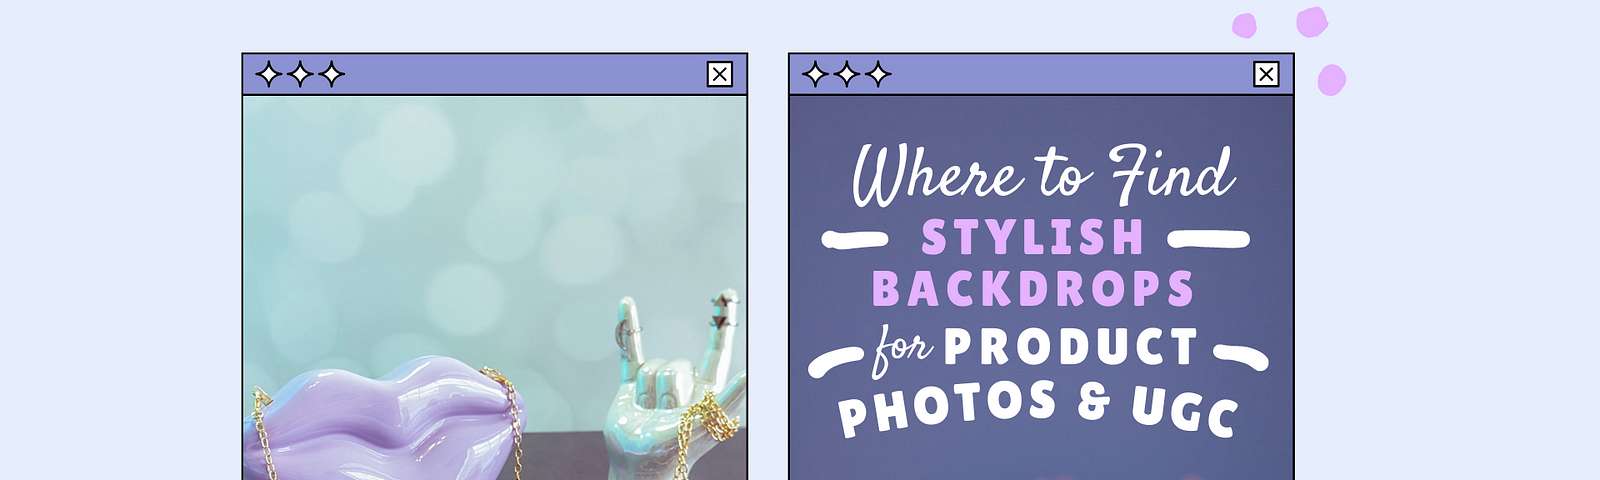 Article feature image: where to find stylish backdrops for product photos & UGC. Left image of styled decorations and right image of rose with title text overlay